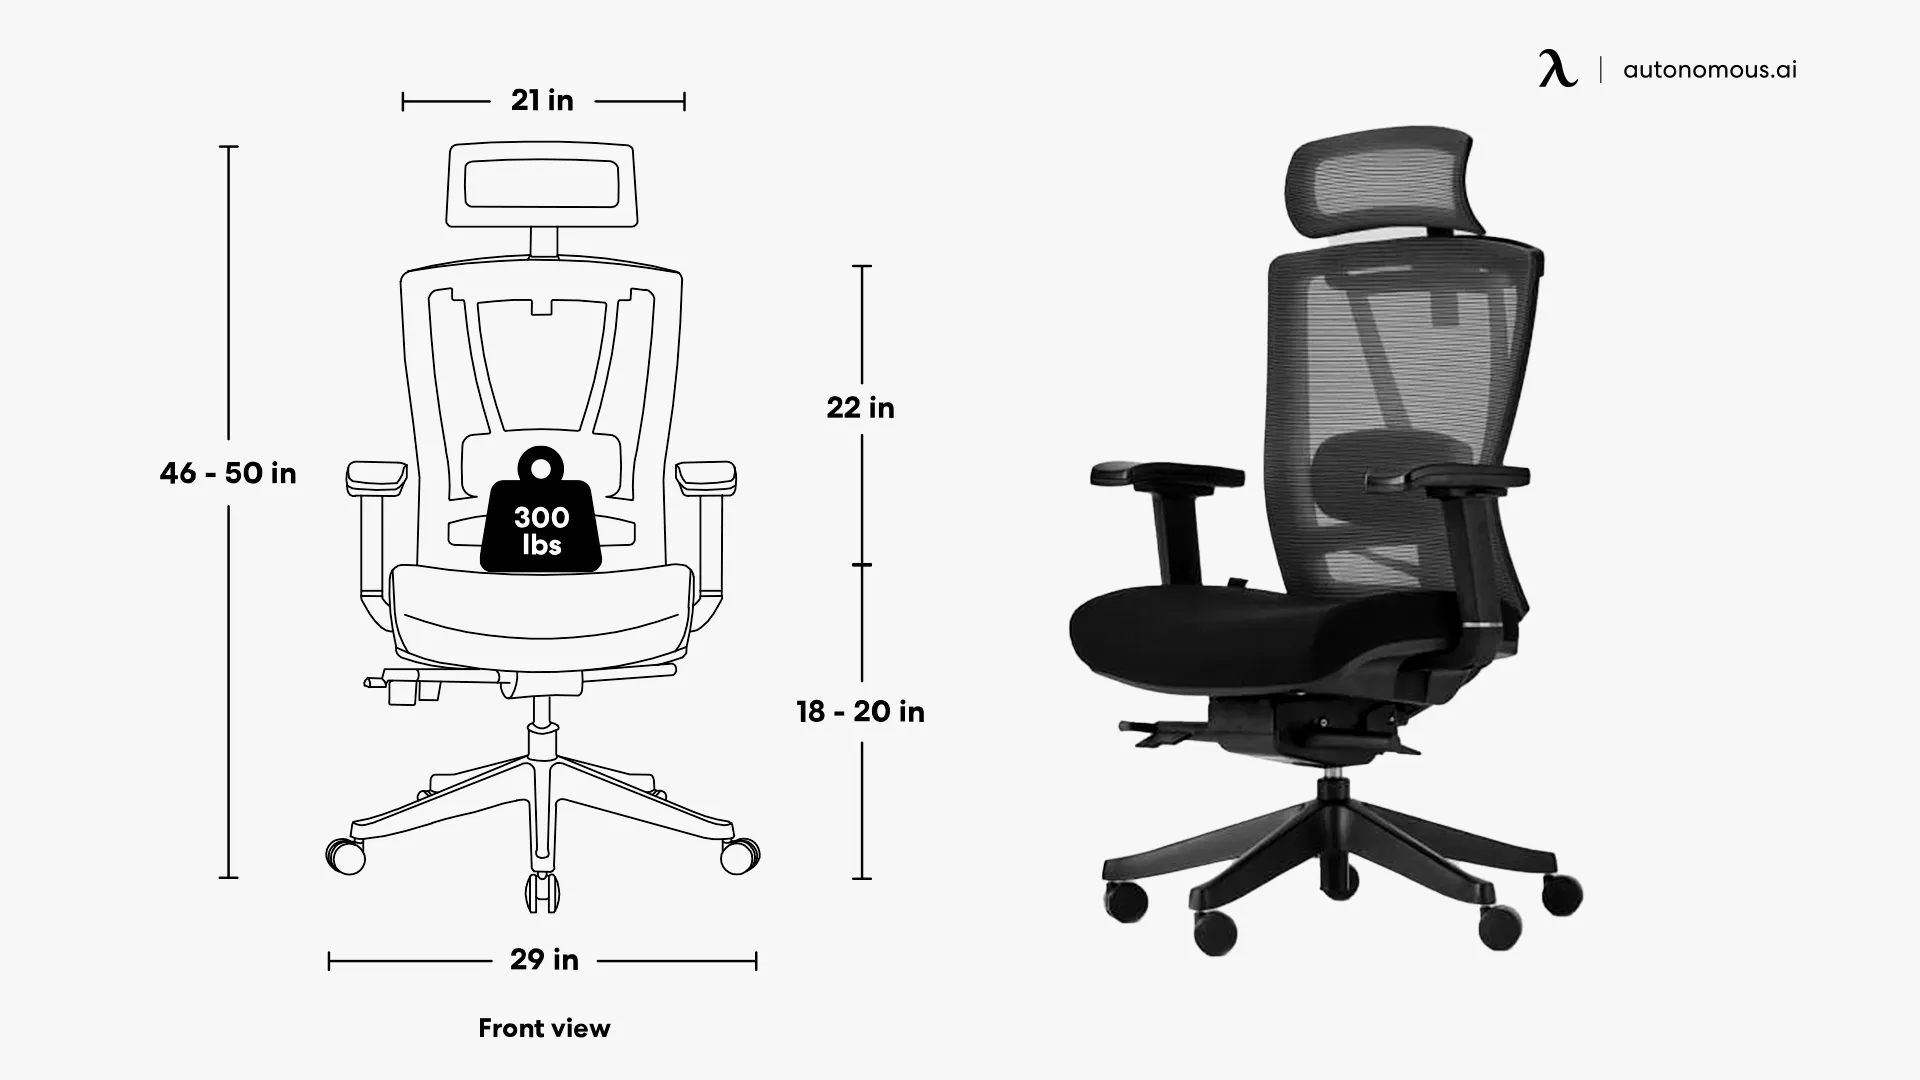 How Much Weight Does an Office Chair Hold?